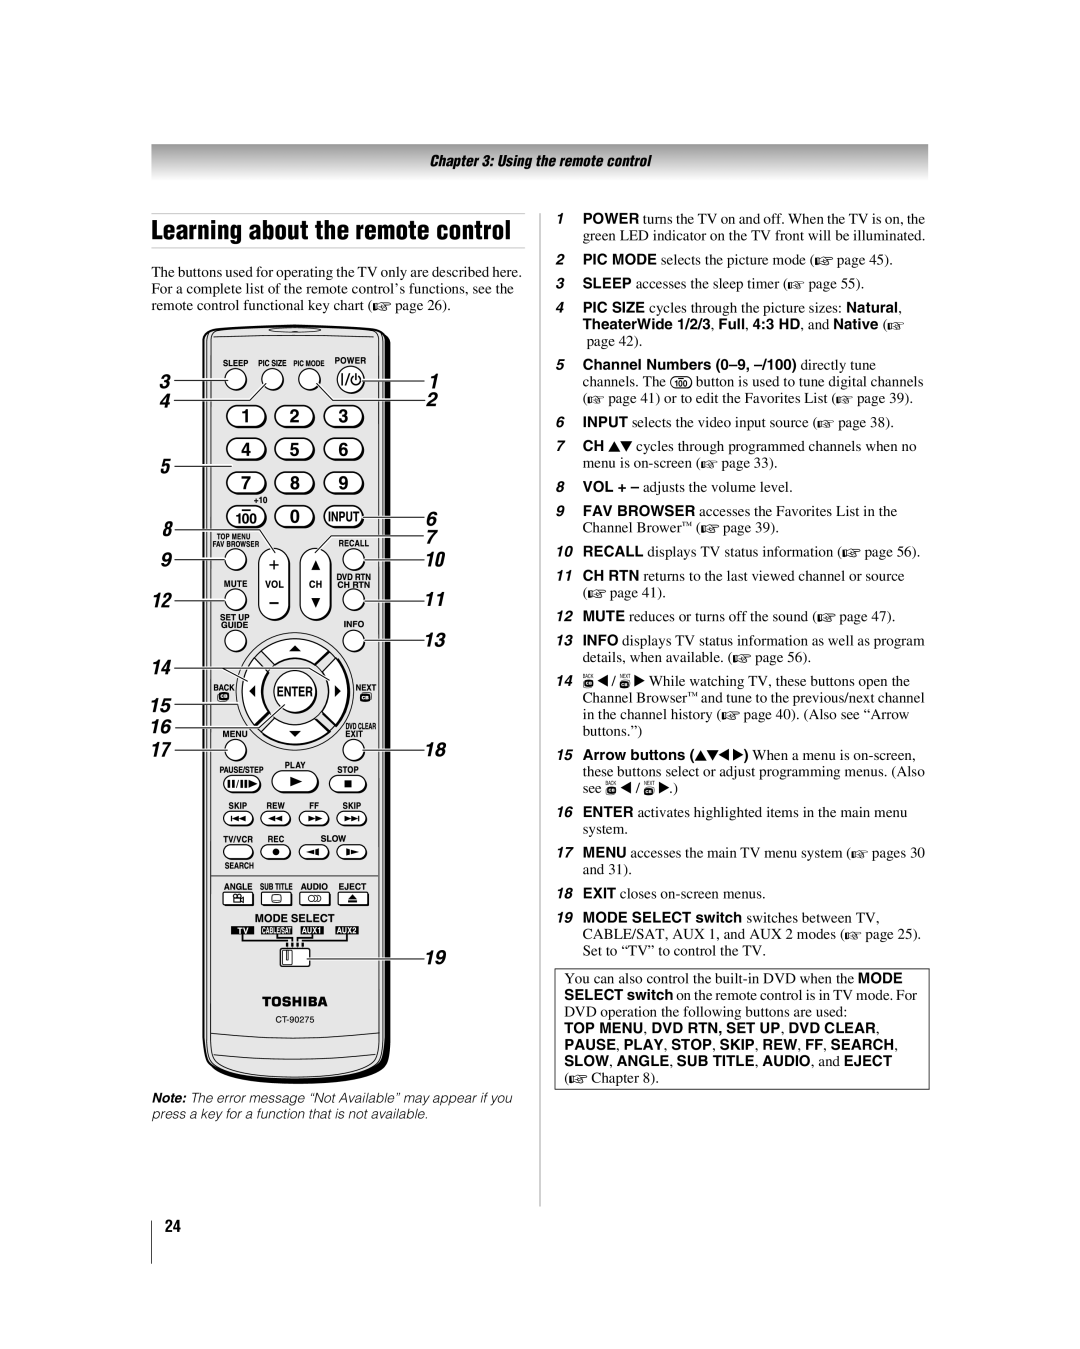 Toshiba 32LV17U manual Learning about the remote control, Using the remote control, Top Menu, Dvd Rtn, Set Up, Dvd Clear 